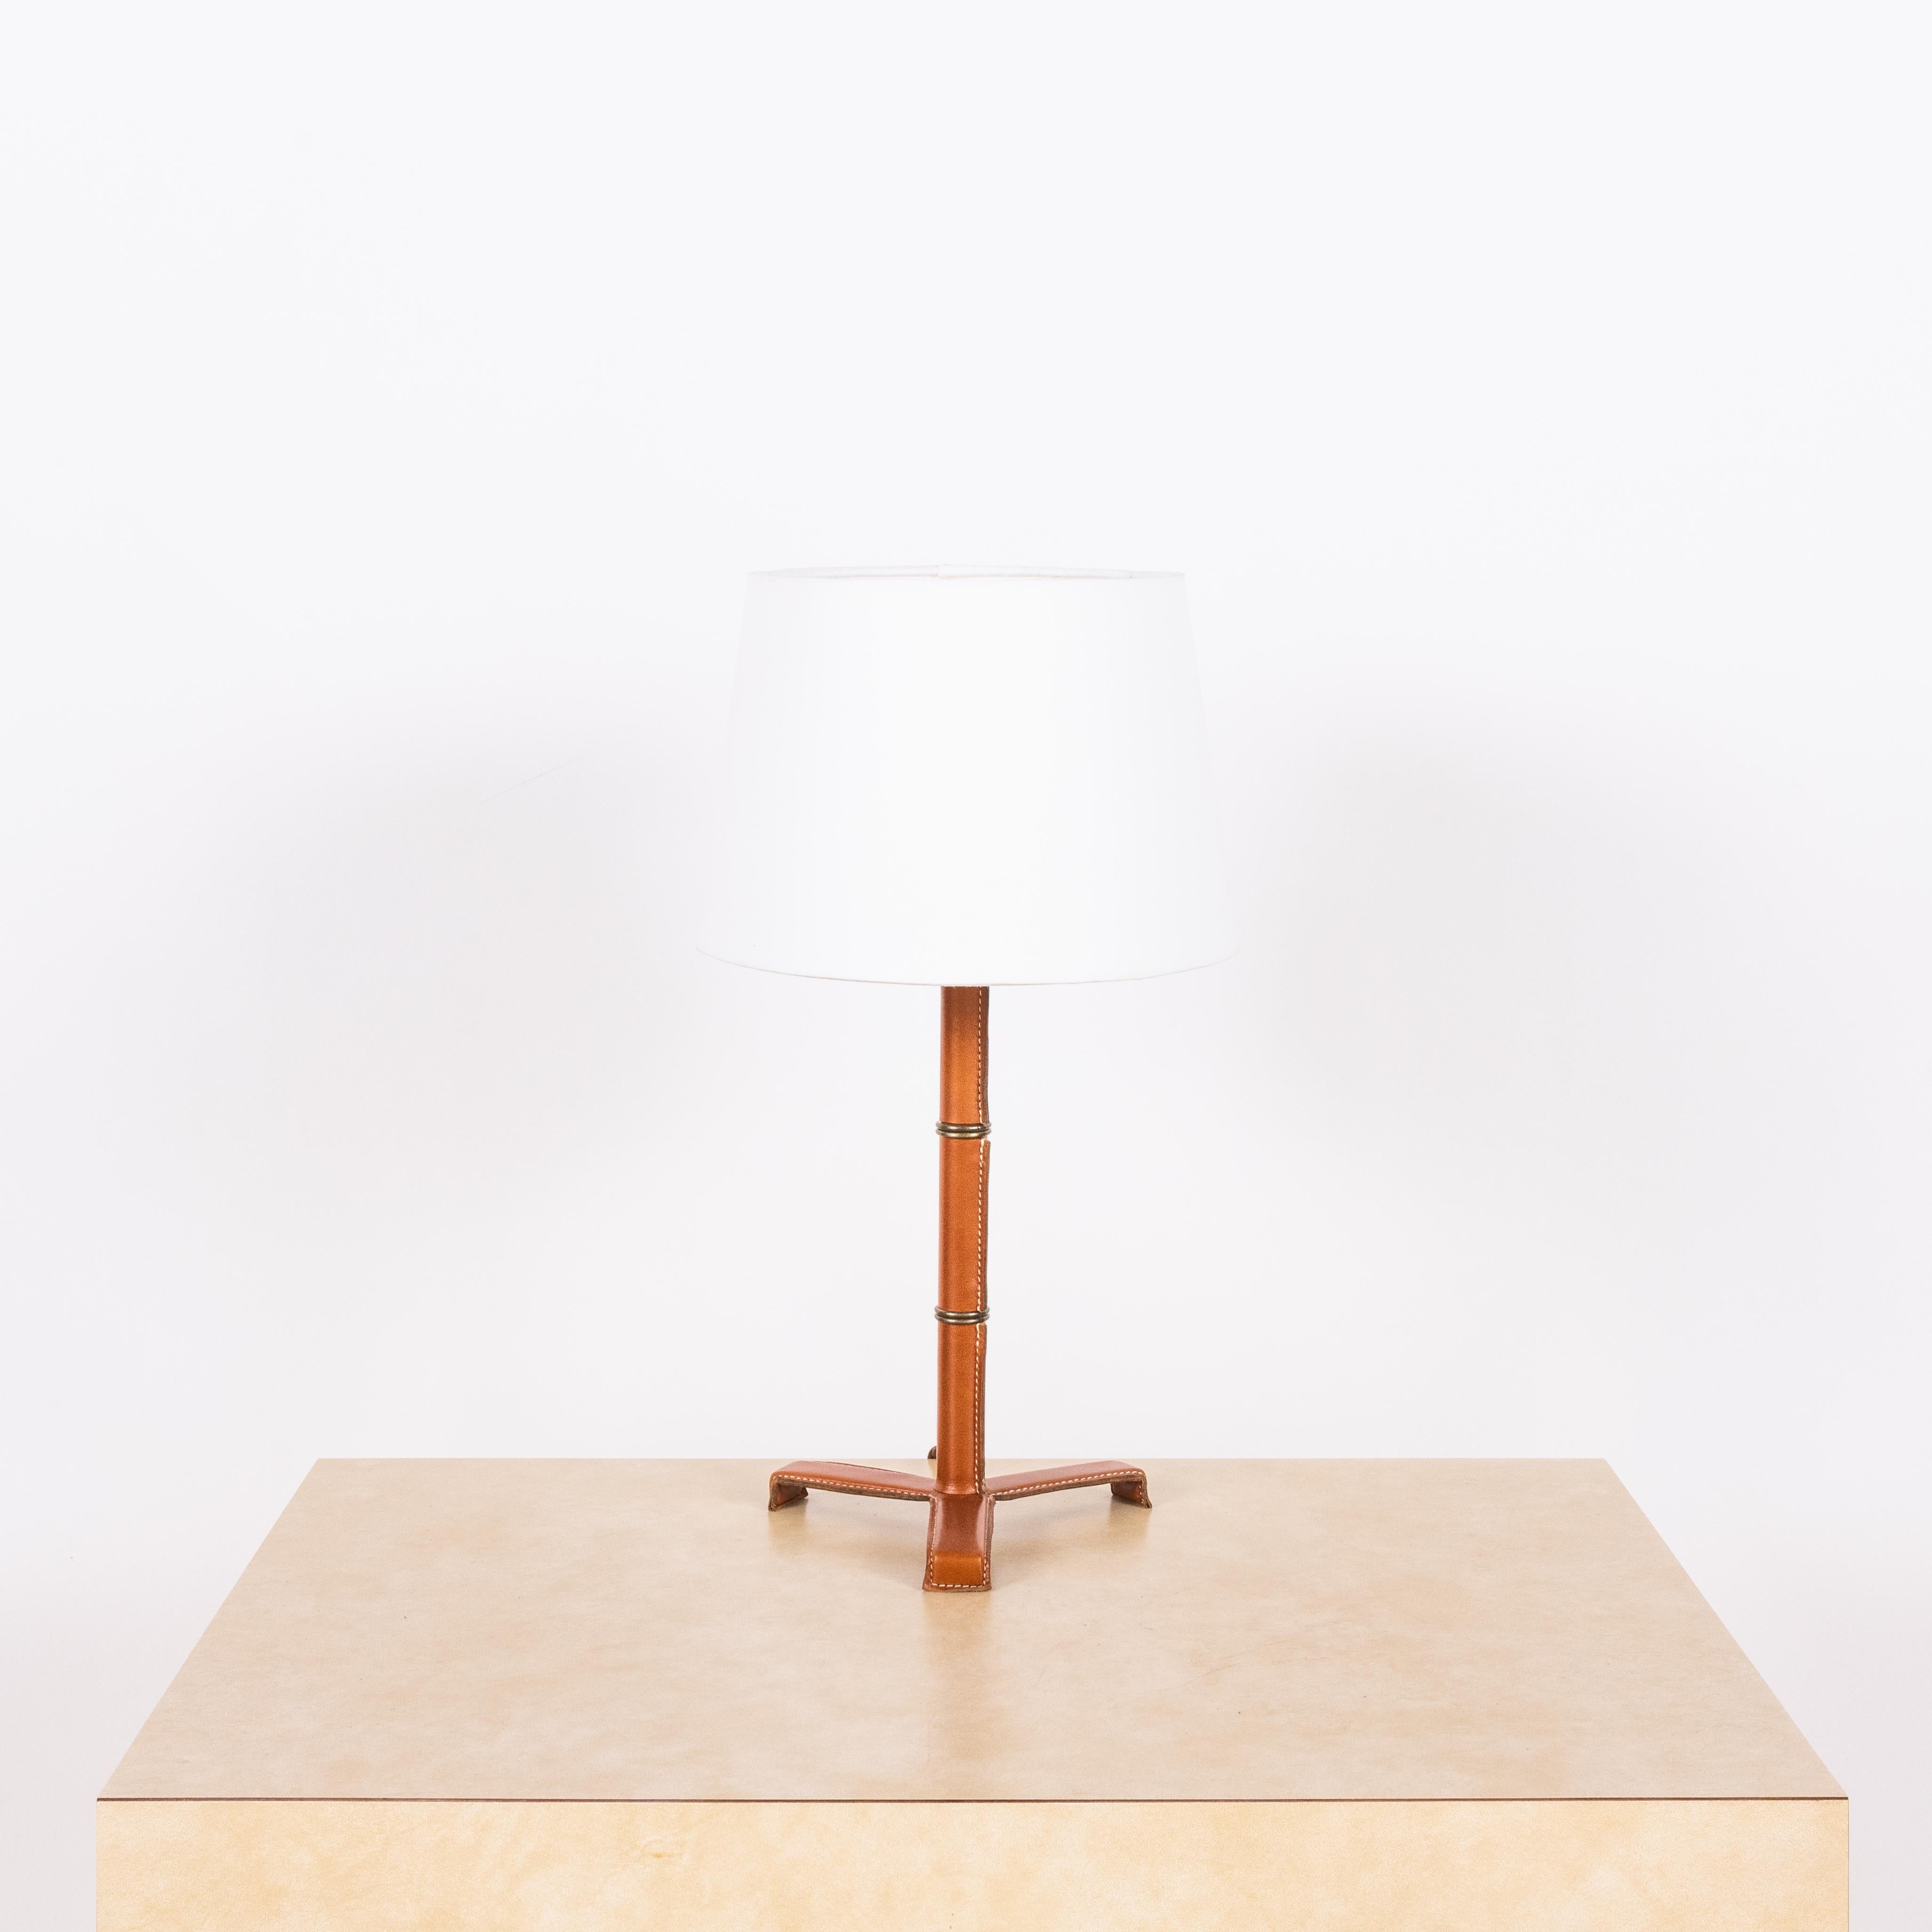 Introducing the 'Sellier' French modernist-style stitched tan leather table lamp by Design Frères.

Crafted from premium black leather, the stitched detailing adds a touch of sophistication, while the parchment paper shade emits a warm and inviting